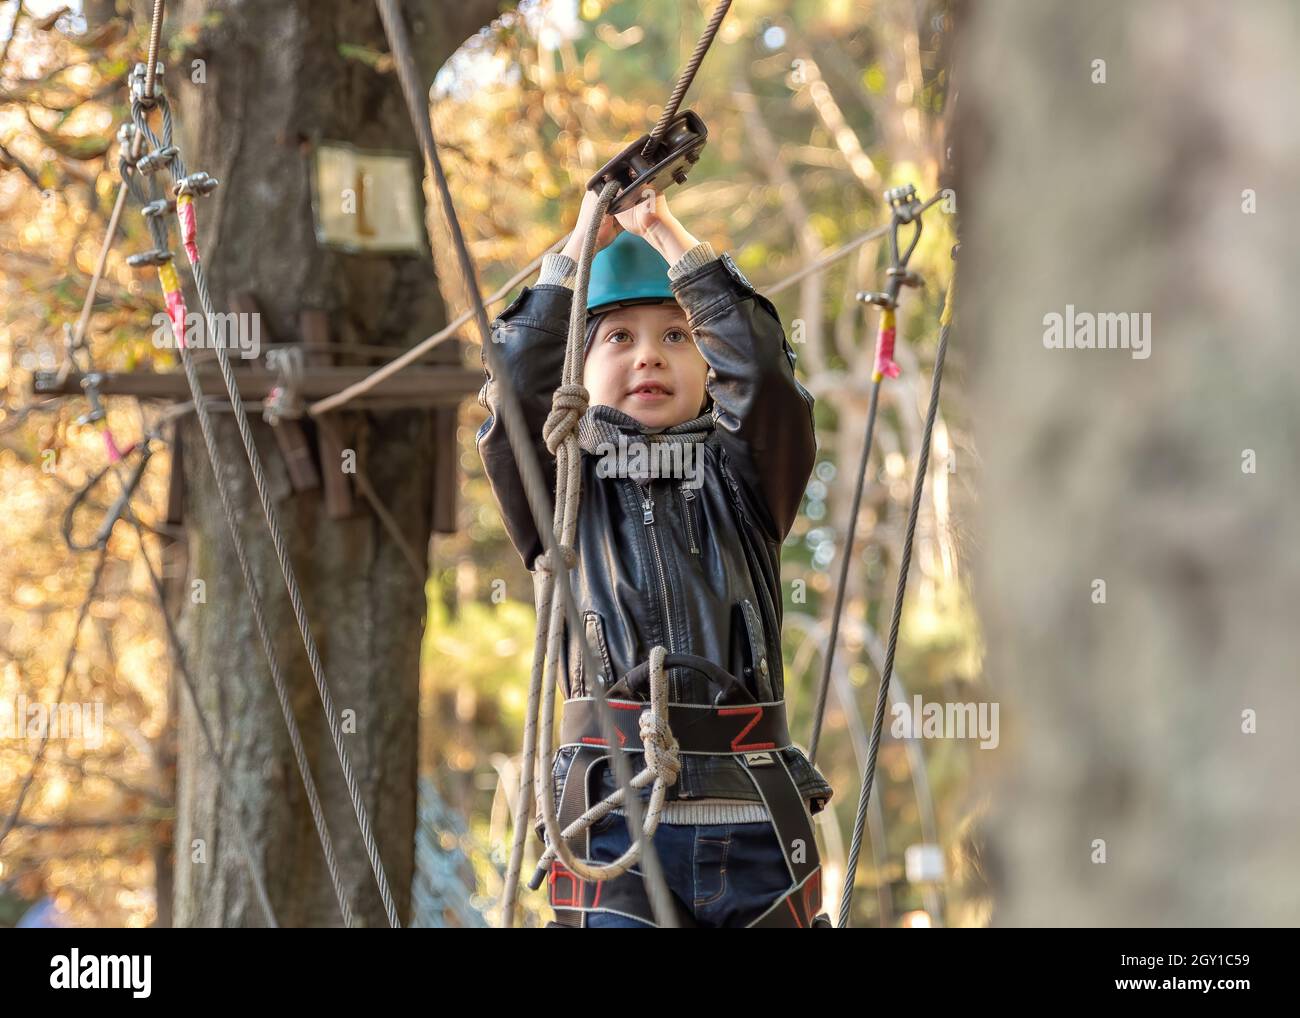 Climbing adventure park - little boy walking a track high up in the trees secured by safety equipment. Brave young child in safety harness climb high on tree tops Stock Photo